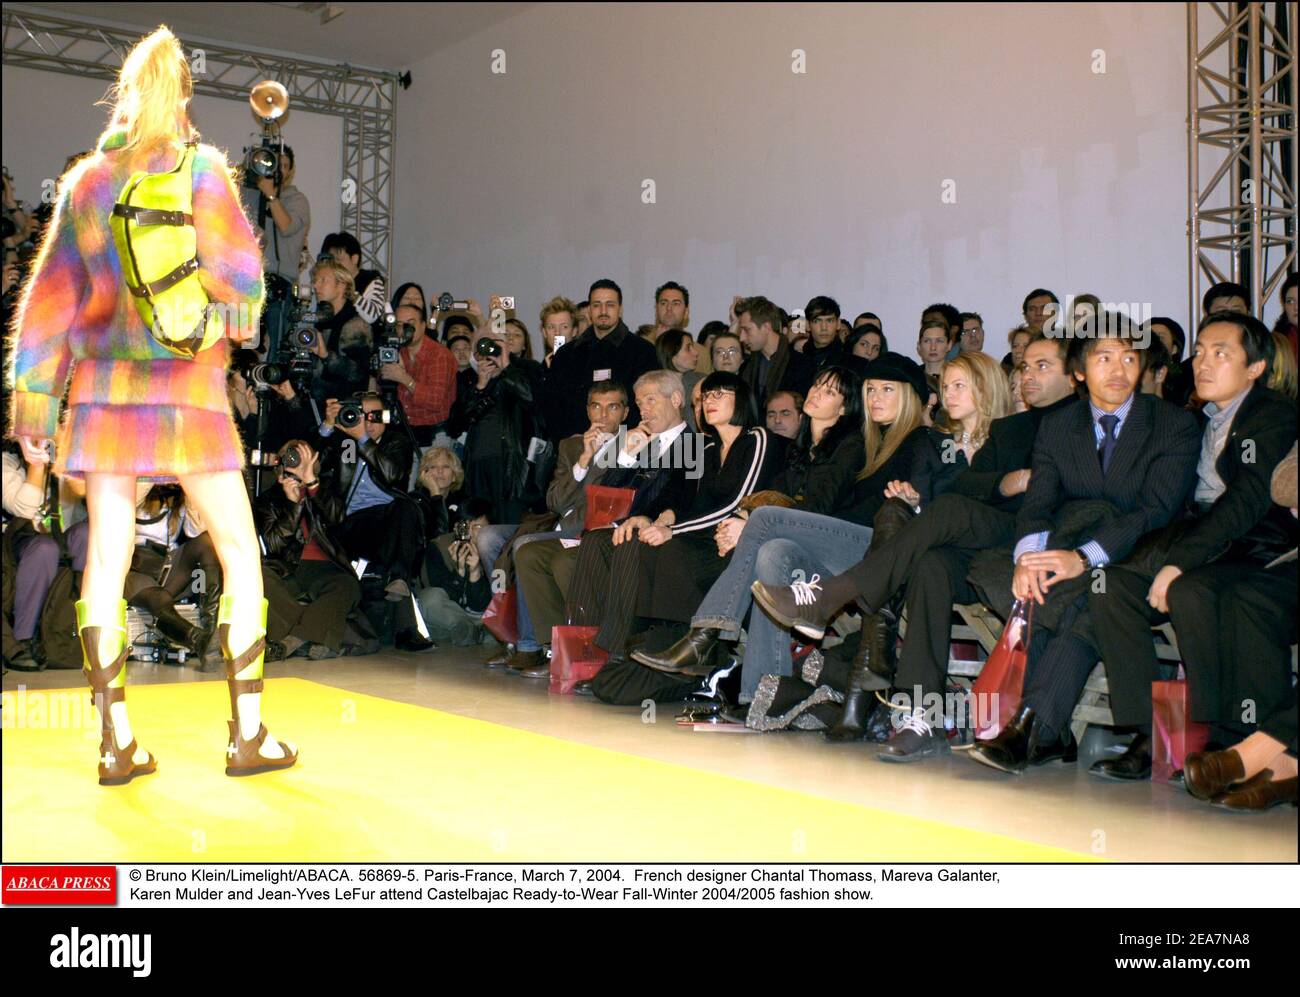 © Bruno Klein/Limelight/ABACA. 56869-5. Paris-France, March 7, 2004. French designer Chantal Thomass, Mareva Galanter, Karen Mulder and Jean-Yves LeFur attend Castelbajac Ready-to-Wear Fall-Winter 2004/2005 fashion show. Stock Photo